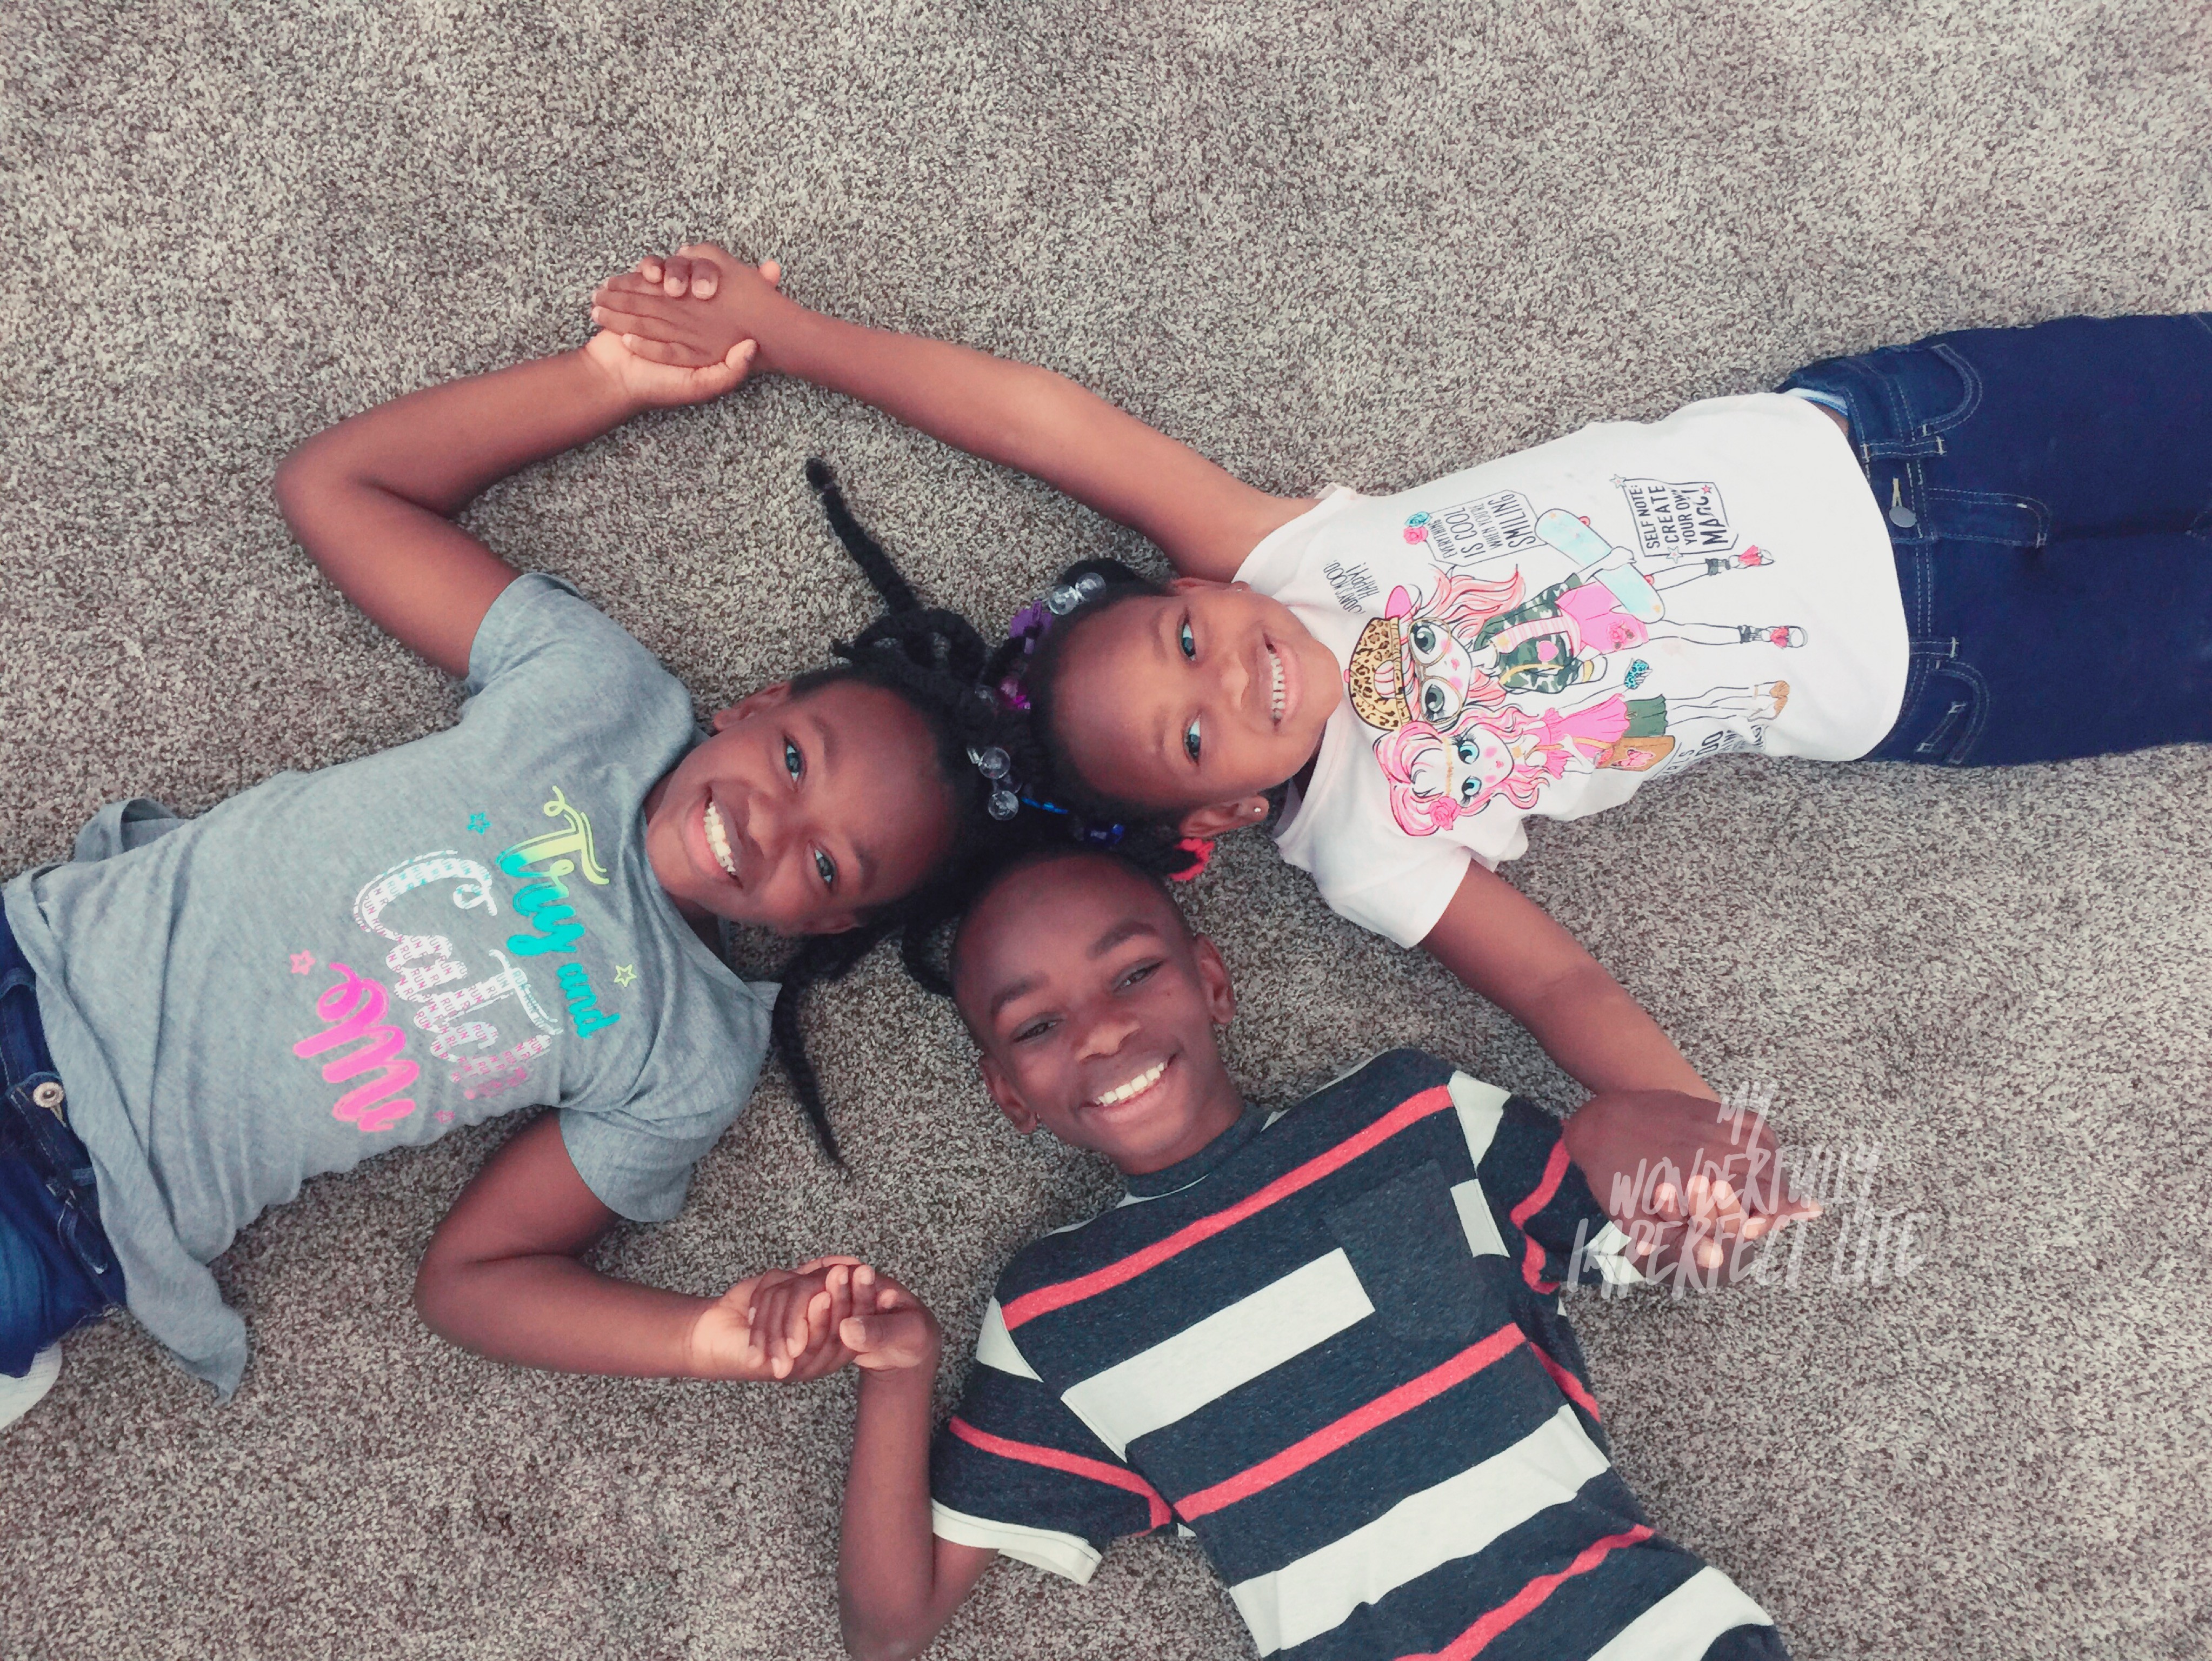 My kids are NOT my top priority